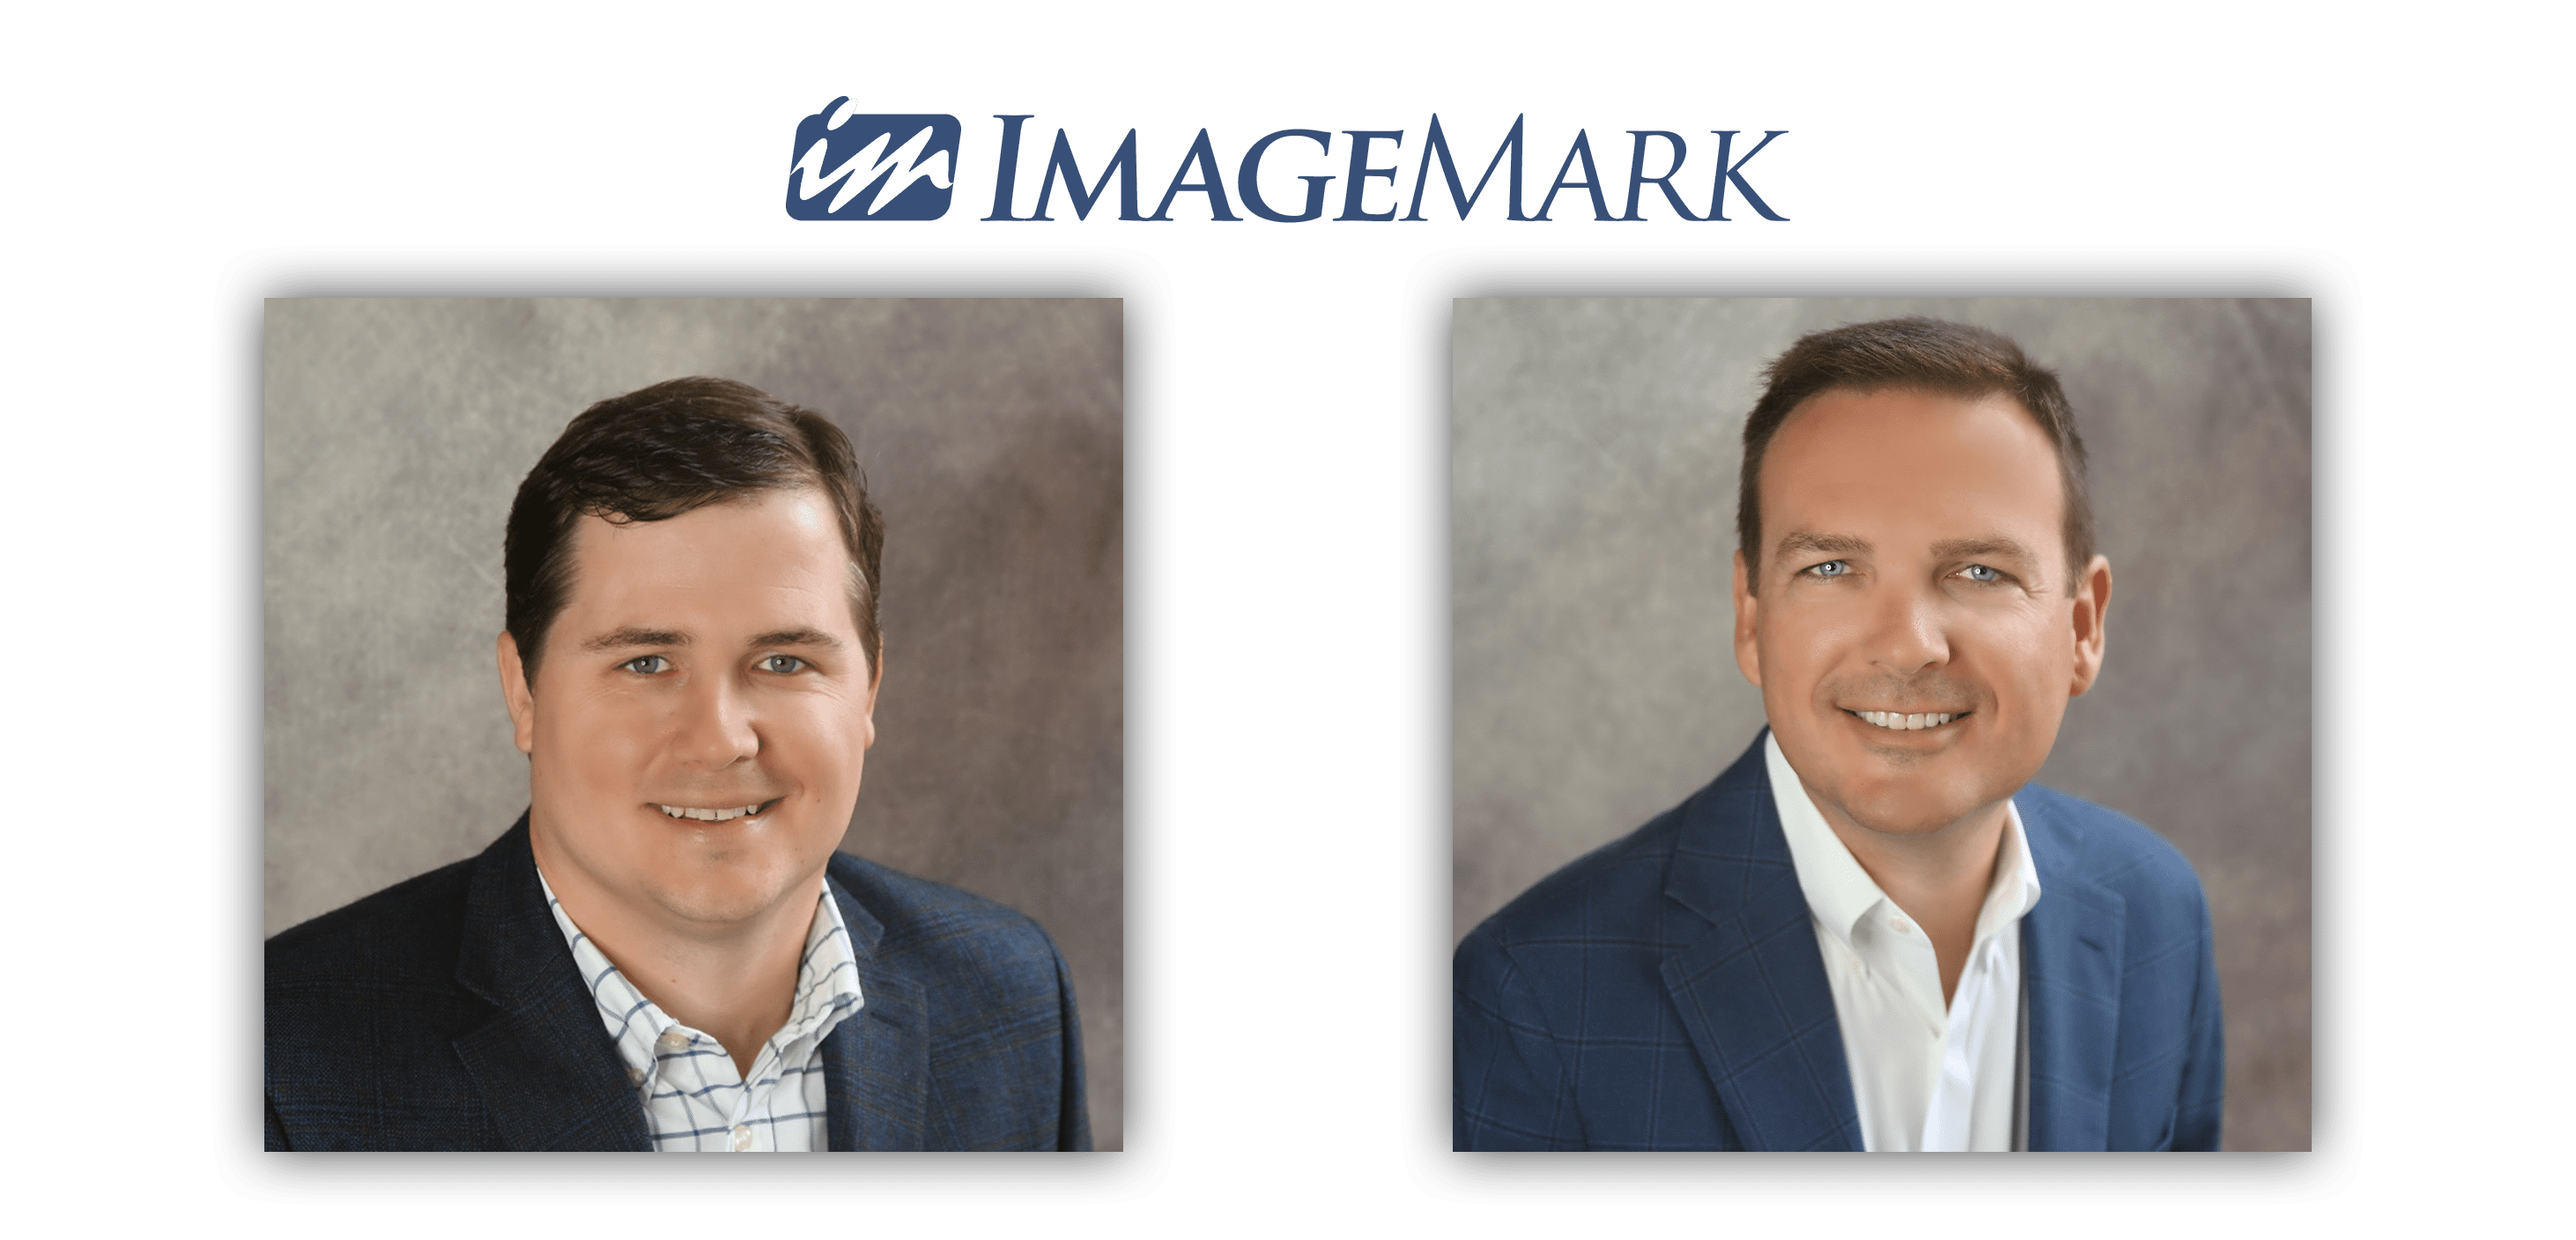 ImageMark Business Services Announces Ownership Transition, Expands Offerings